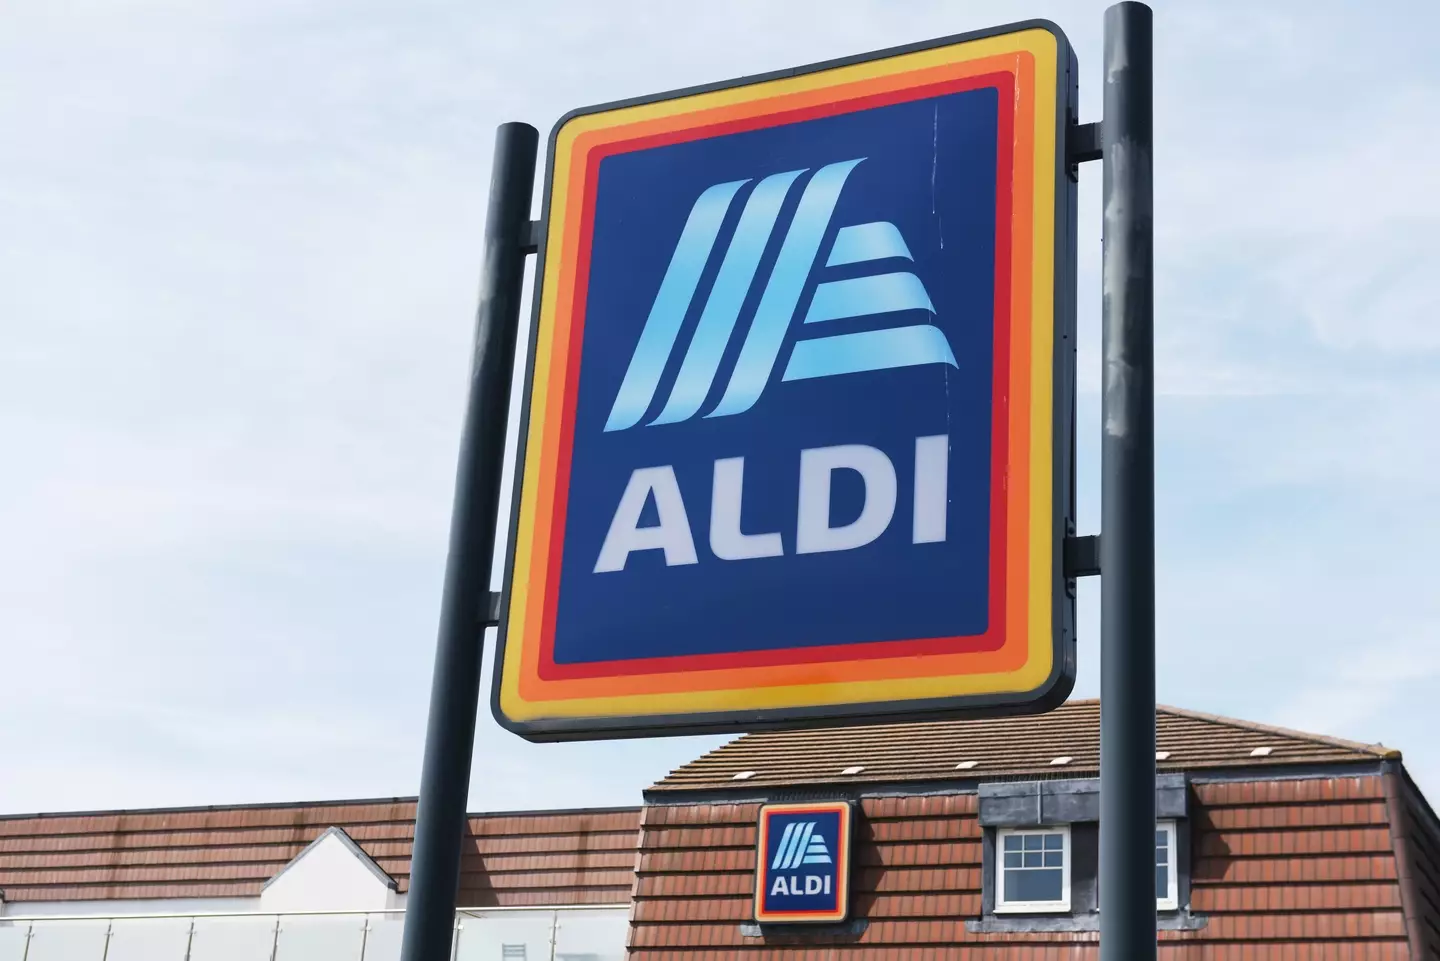 Aldi staff are known for their speedy checkout methods.